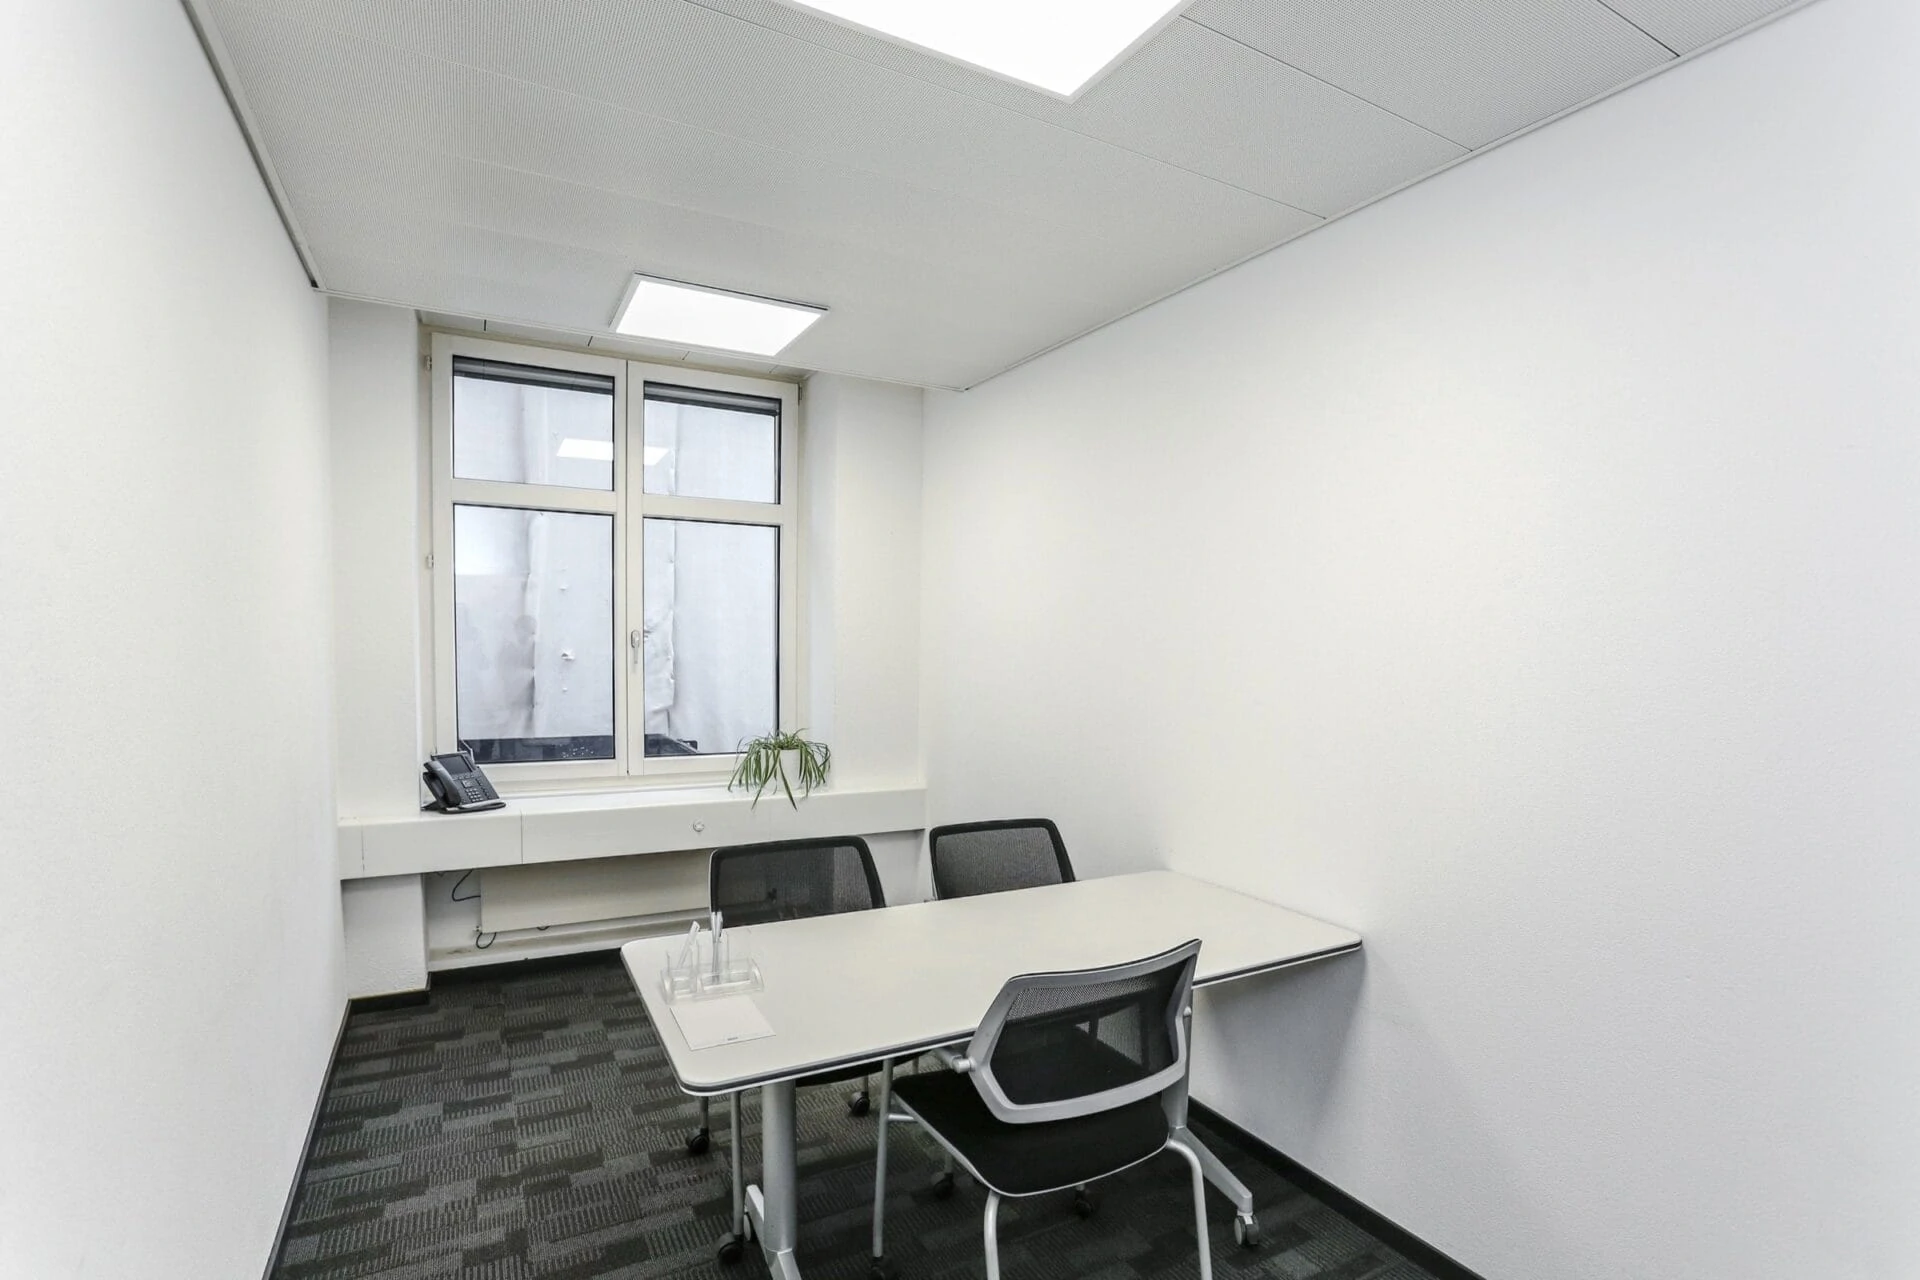 Small room for meetings with window